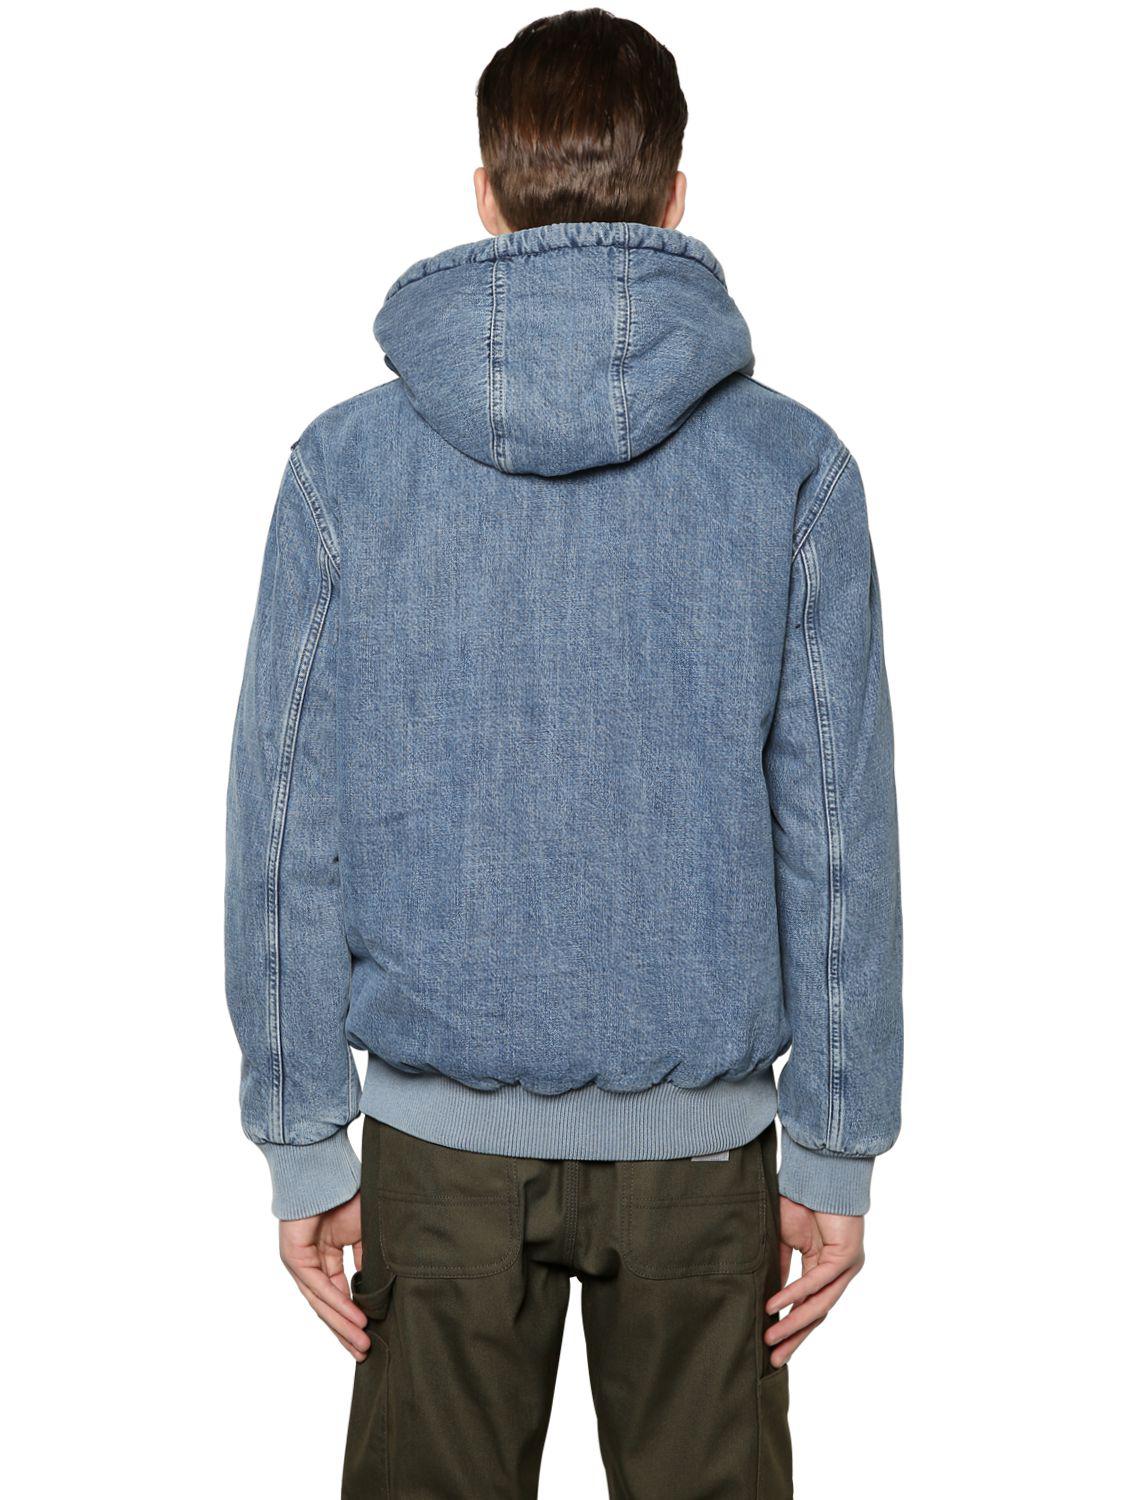 Carhartt Hooded Stone Washed Active Denim Jacket in Blue for Men